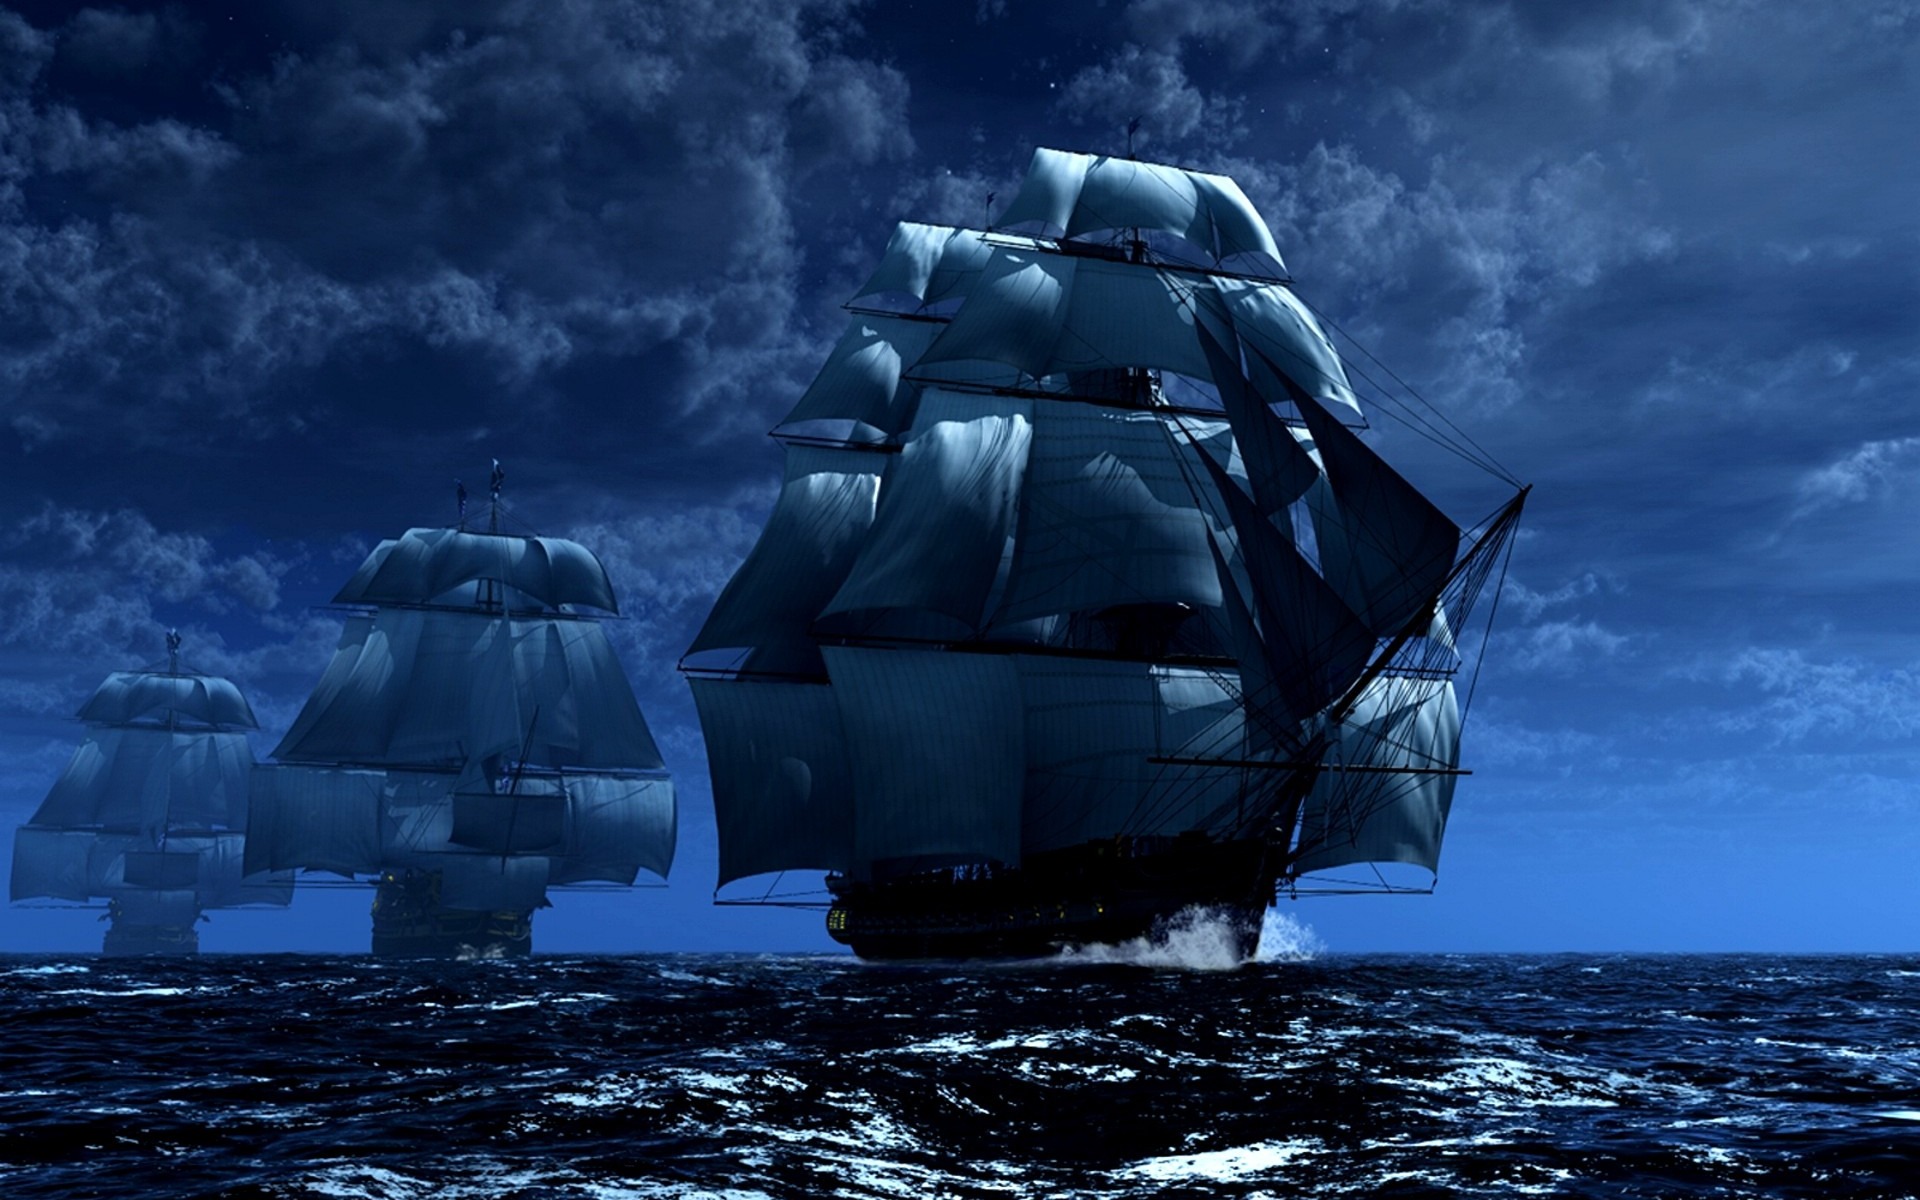 The Sailing Ships Wallpaper And Image Pictures Photos